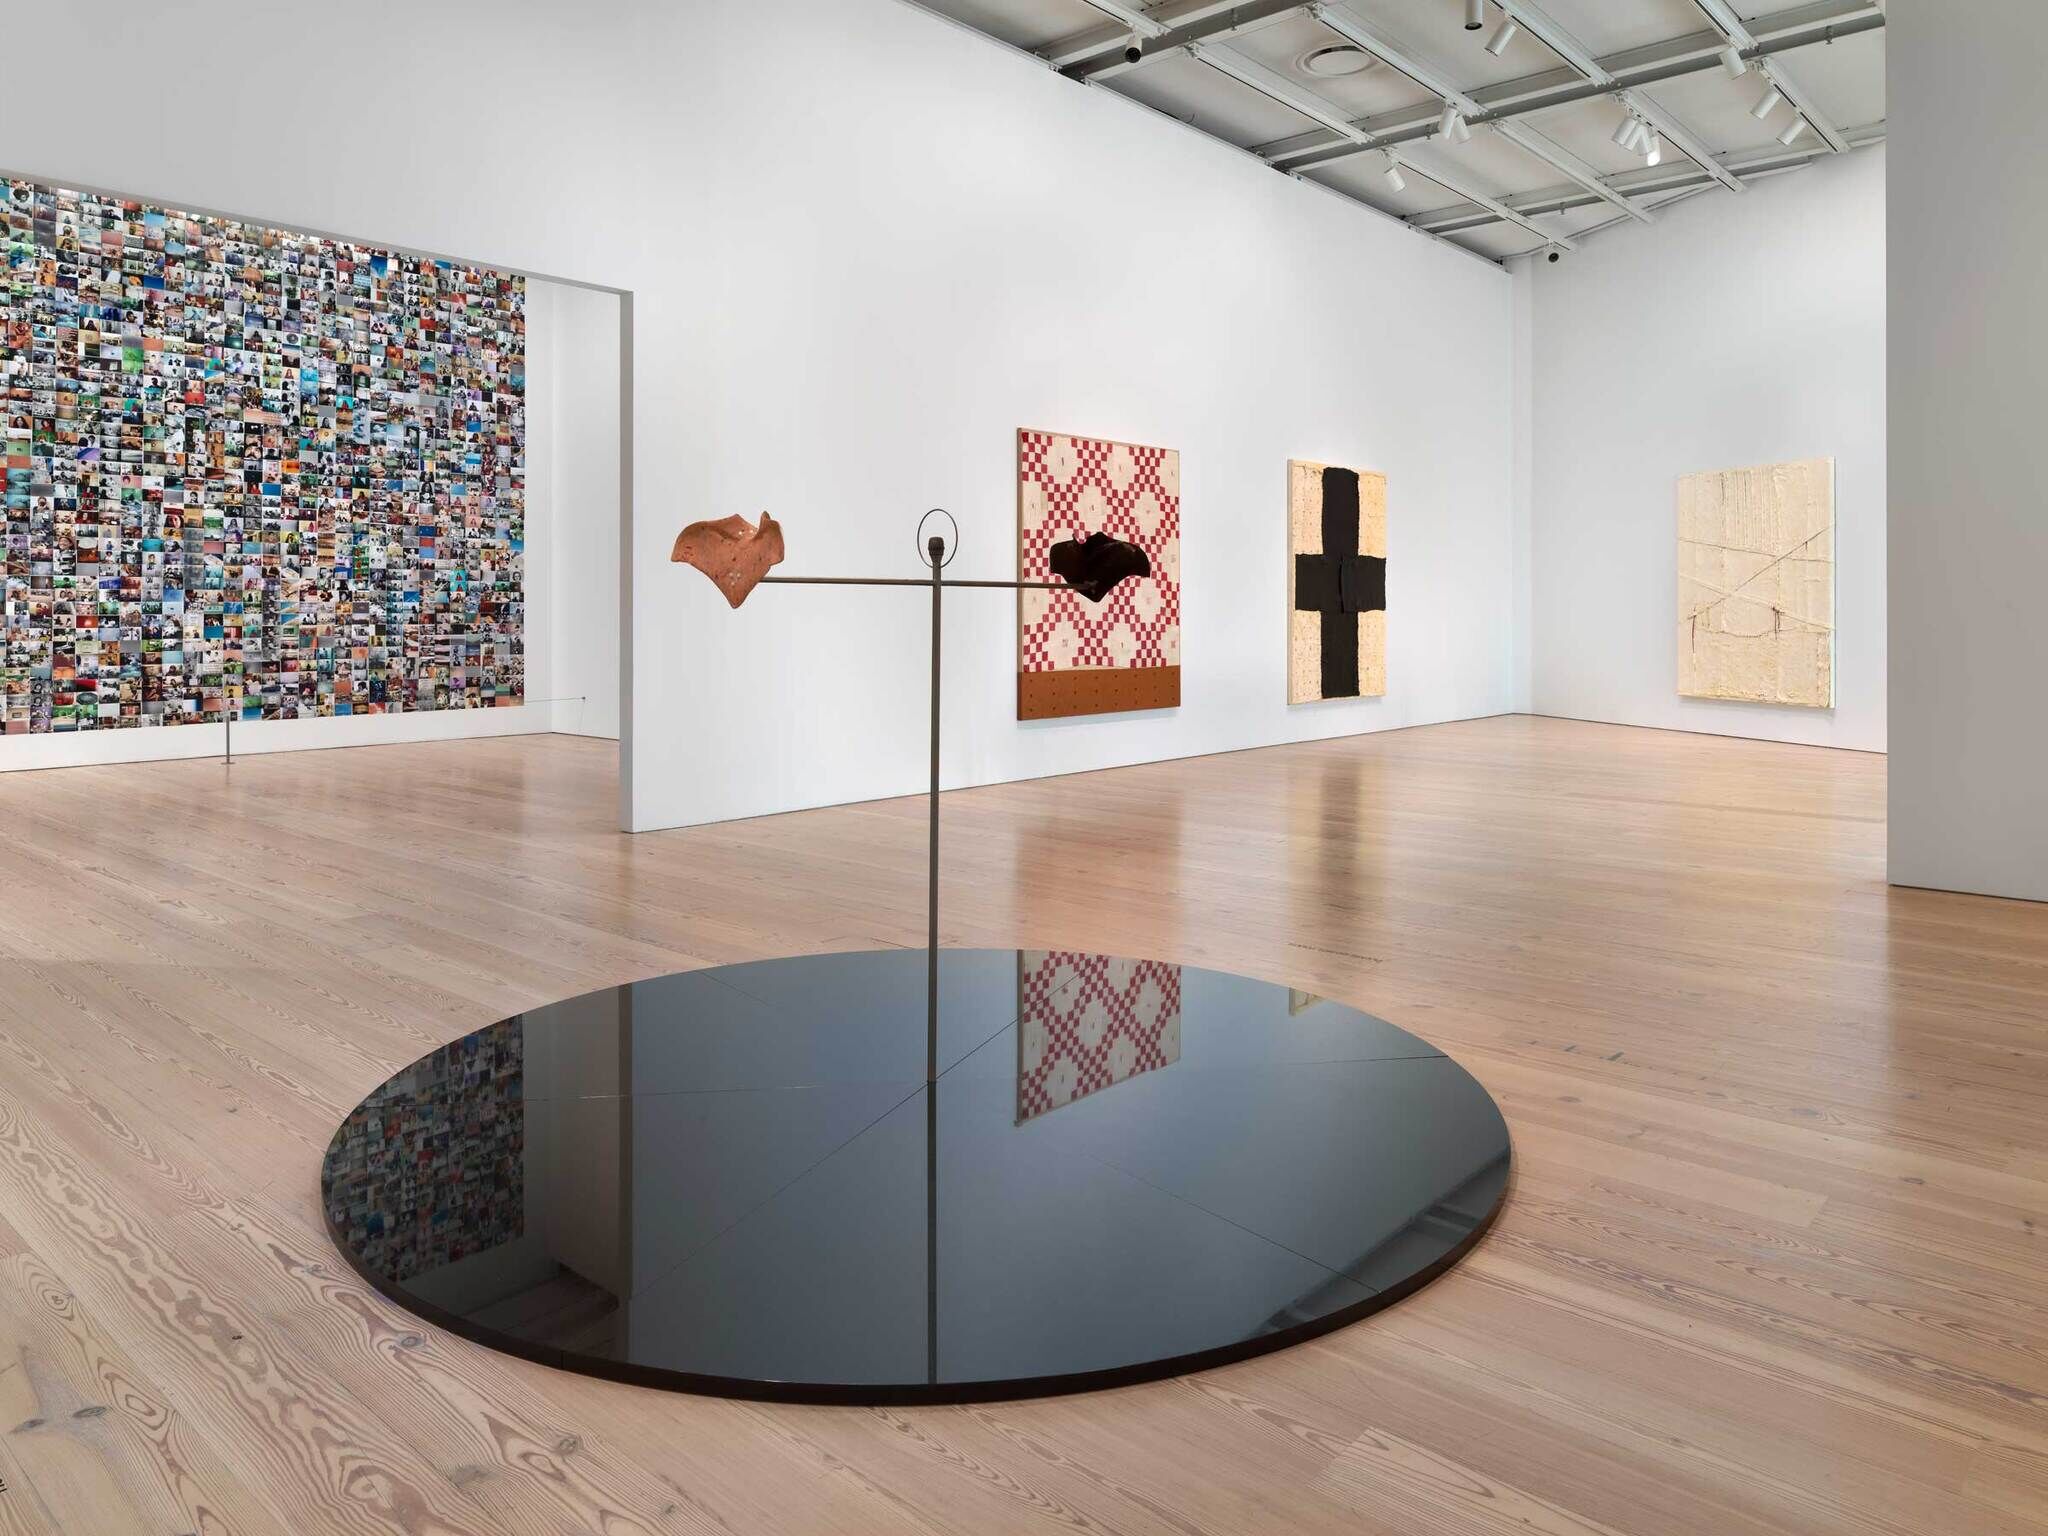 Modern art gallery interior with various abstract artworks on walls and a sculpture with a reflective base on the floor.